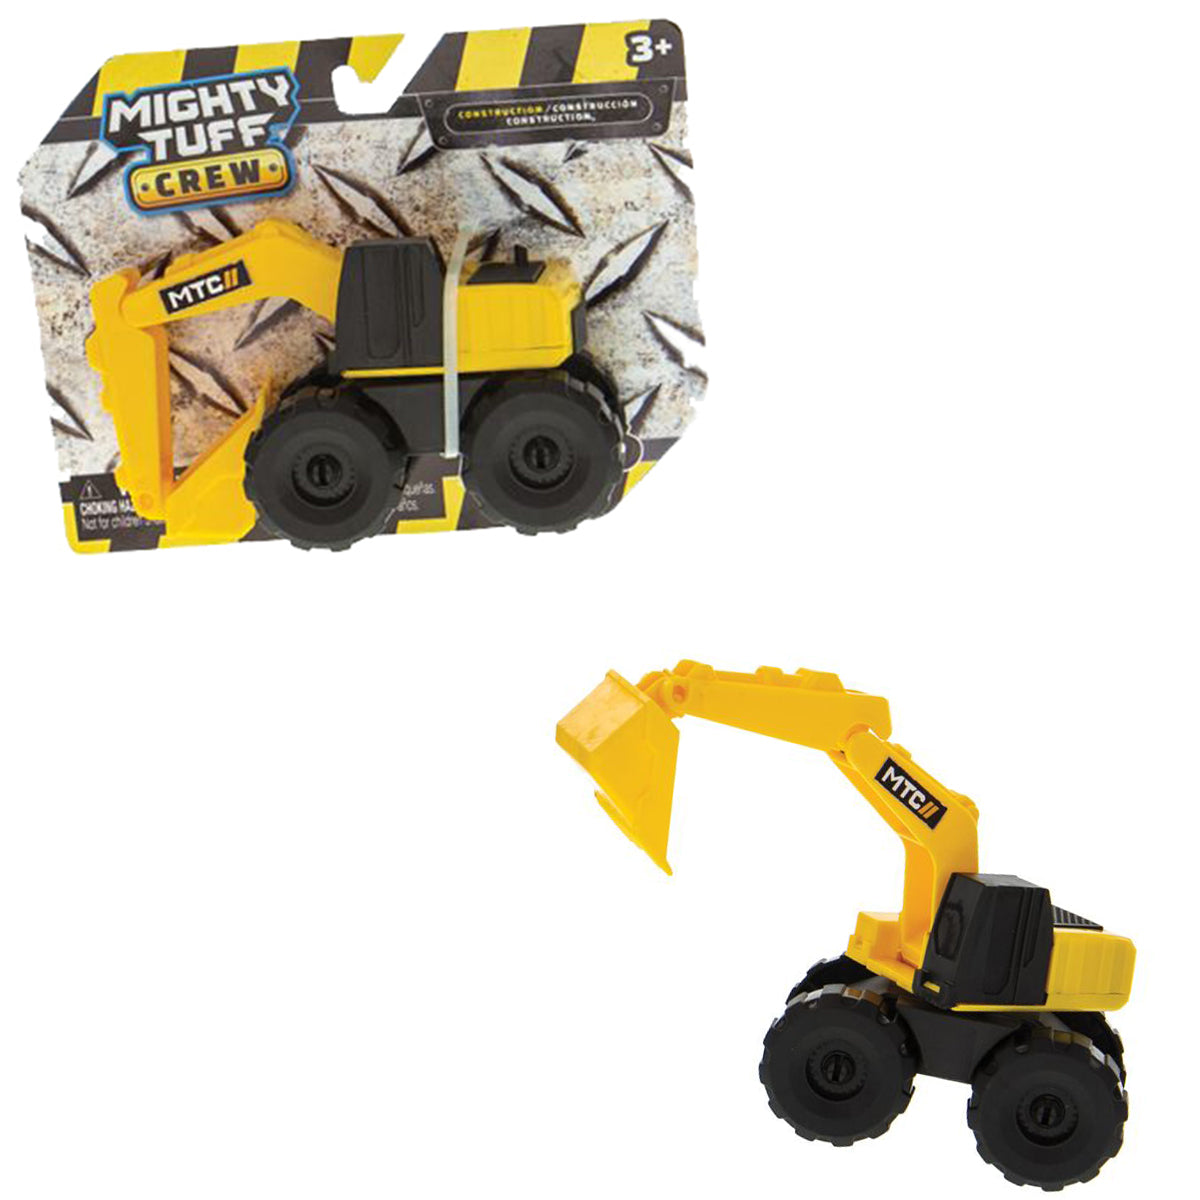 Mighty Tuff Crew Vehicle (Styles Vary - One Supplied)